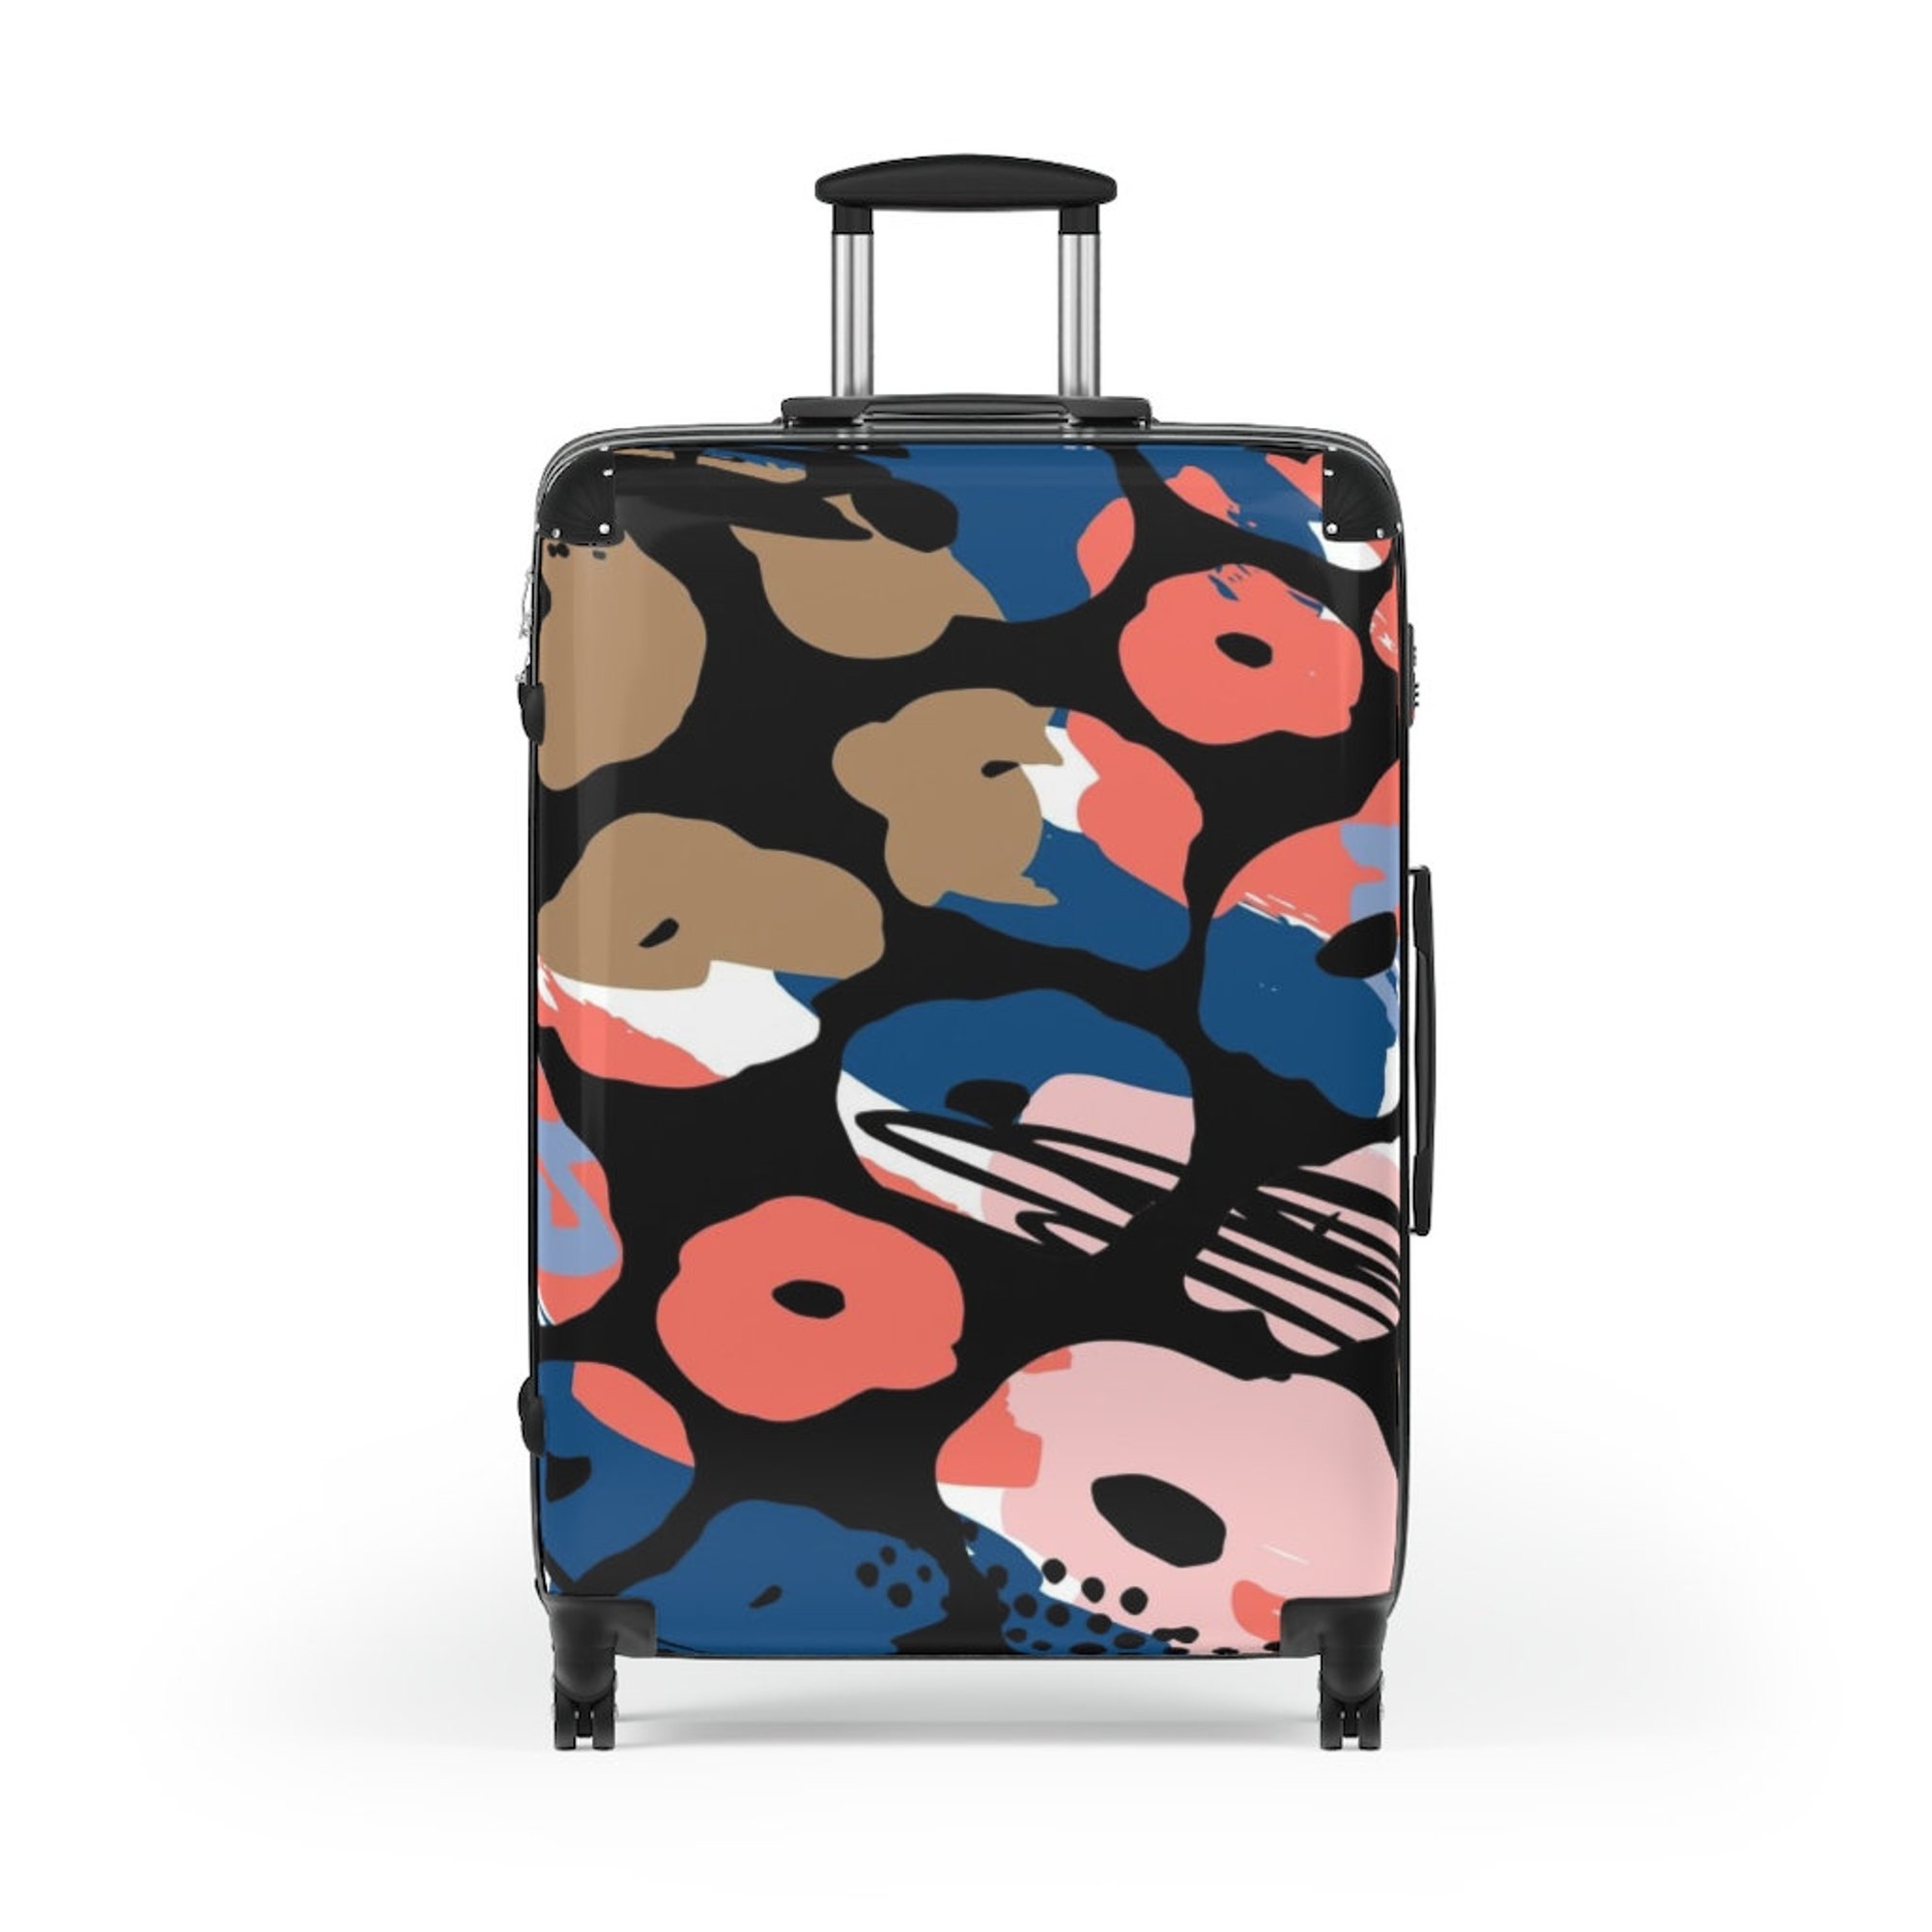 Discover The Cora Suitcase